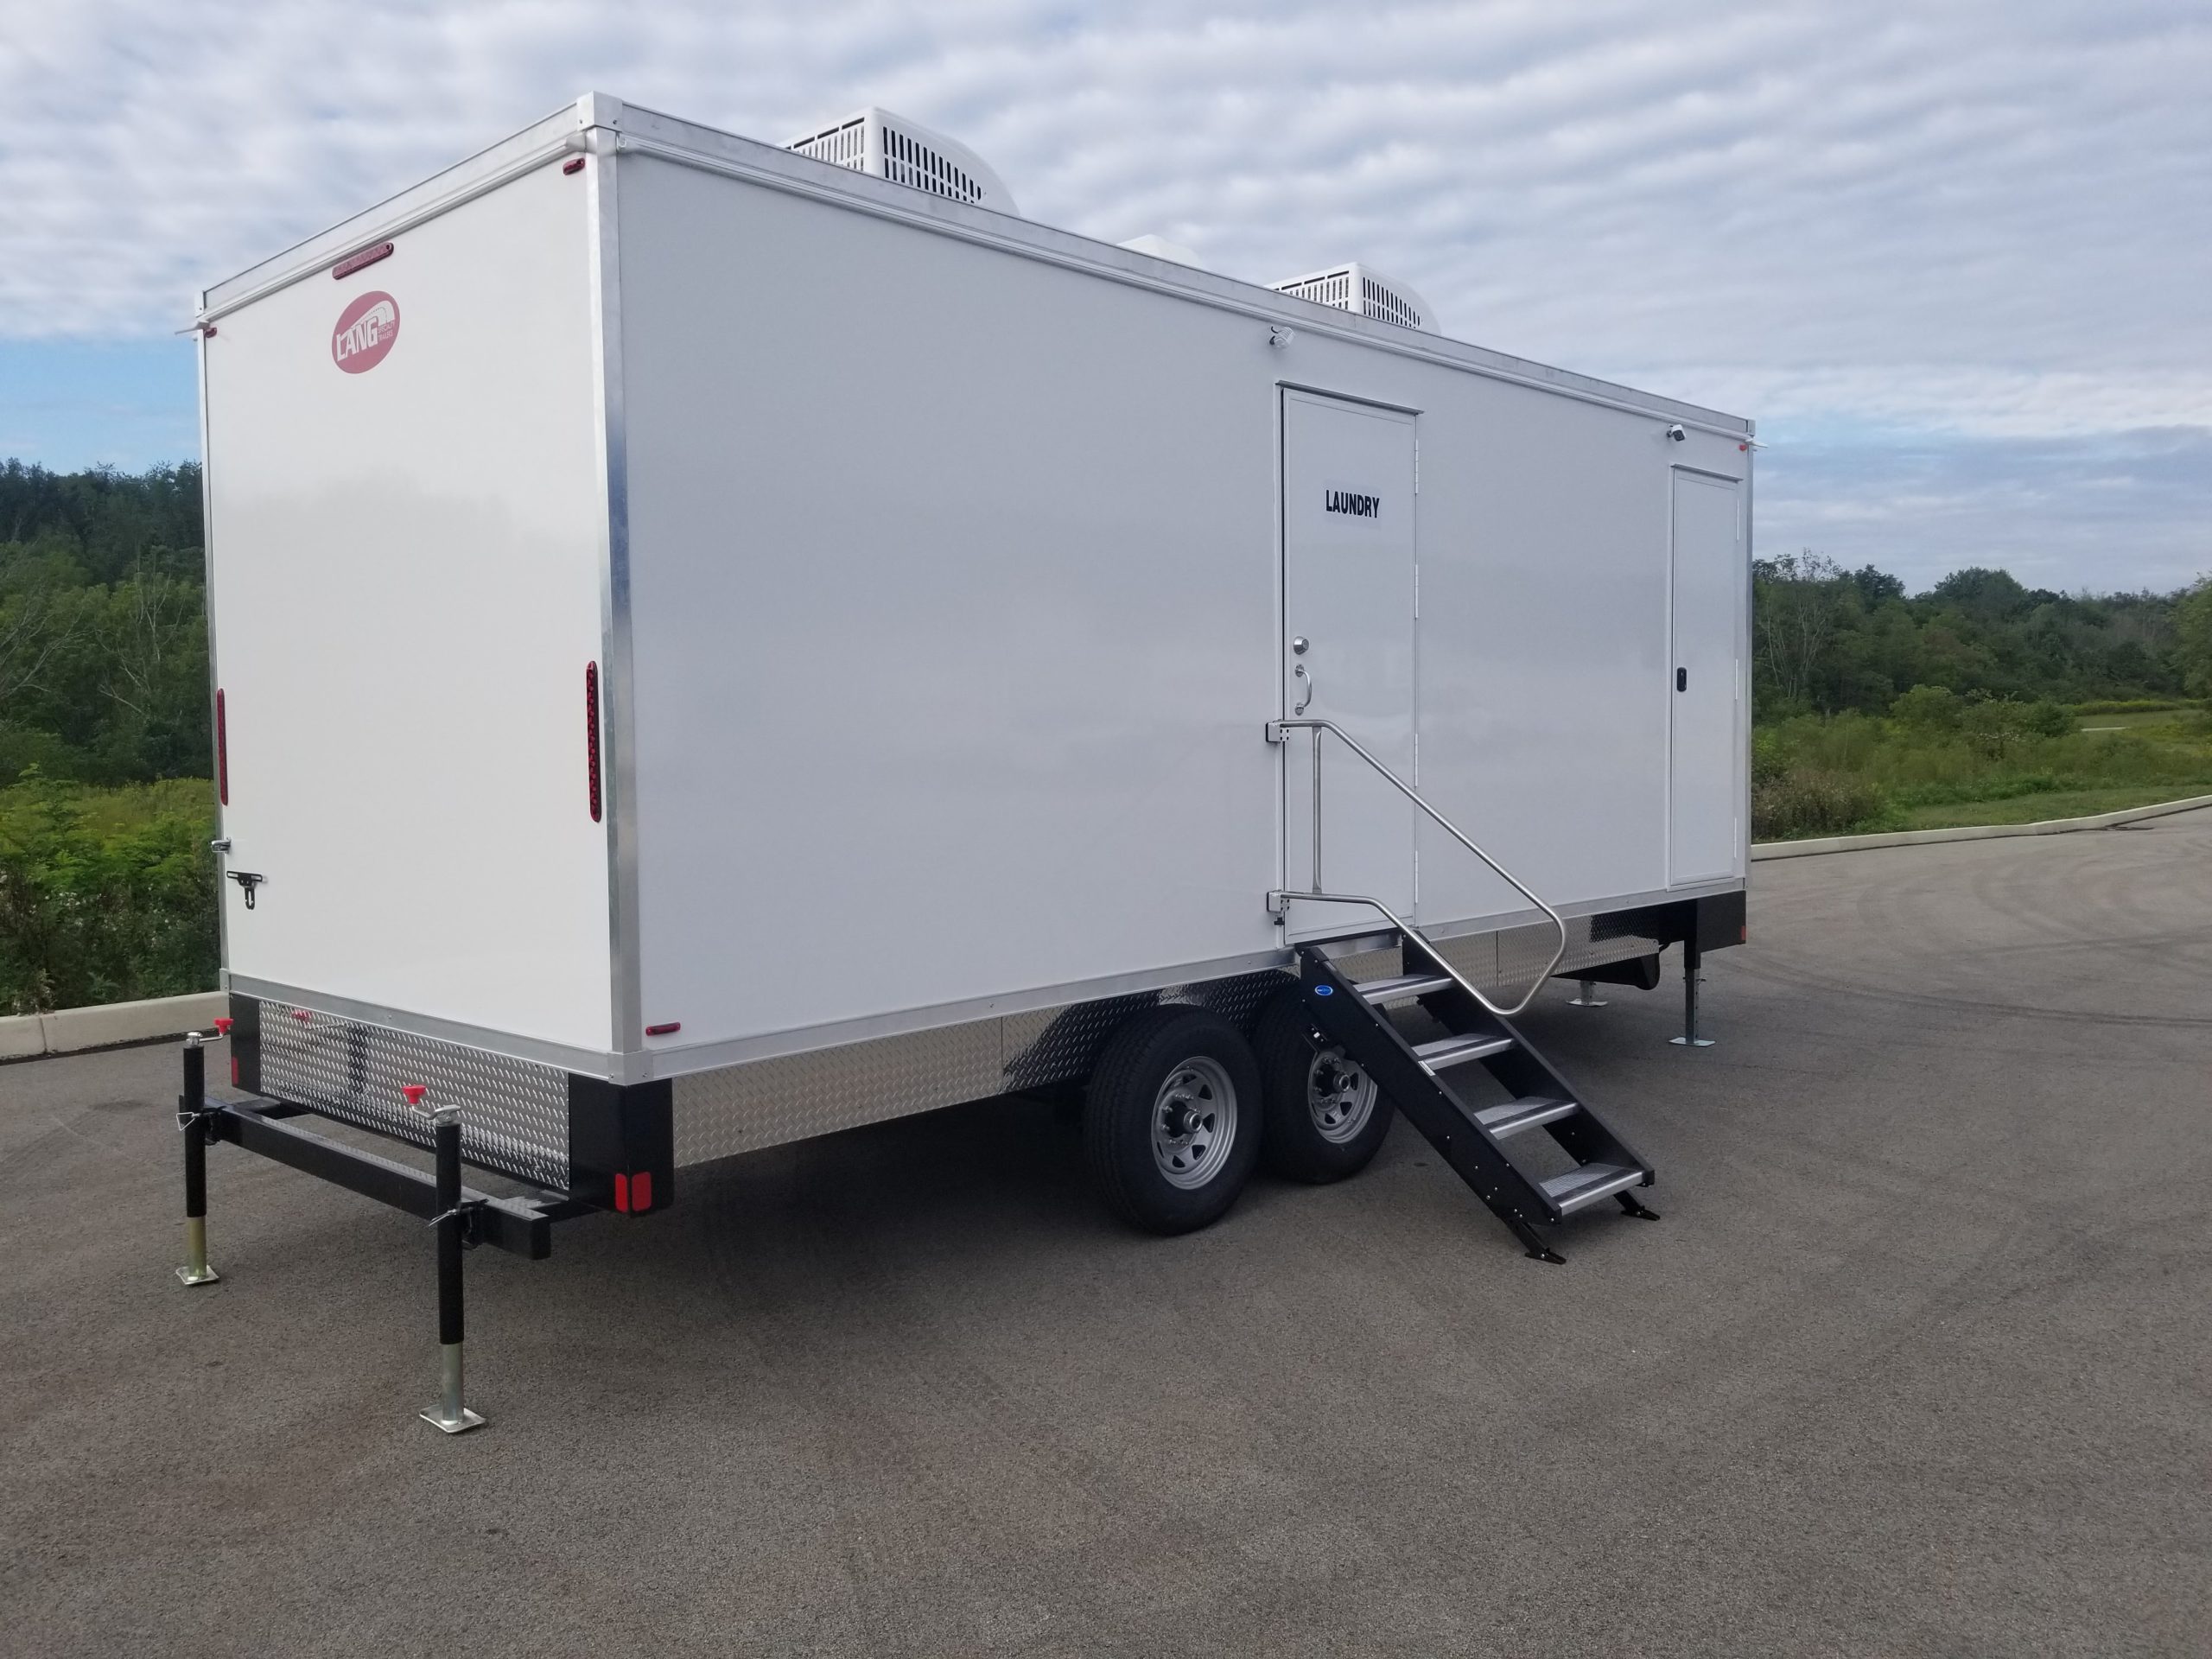 Mobile Laundry Trailers - ICE FOX Equipment - 24 Hours Emergency